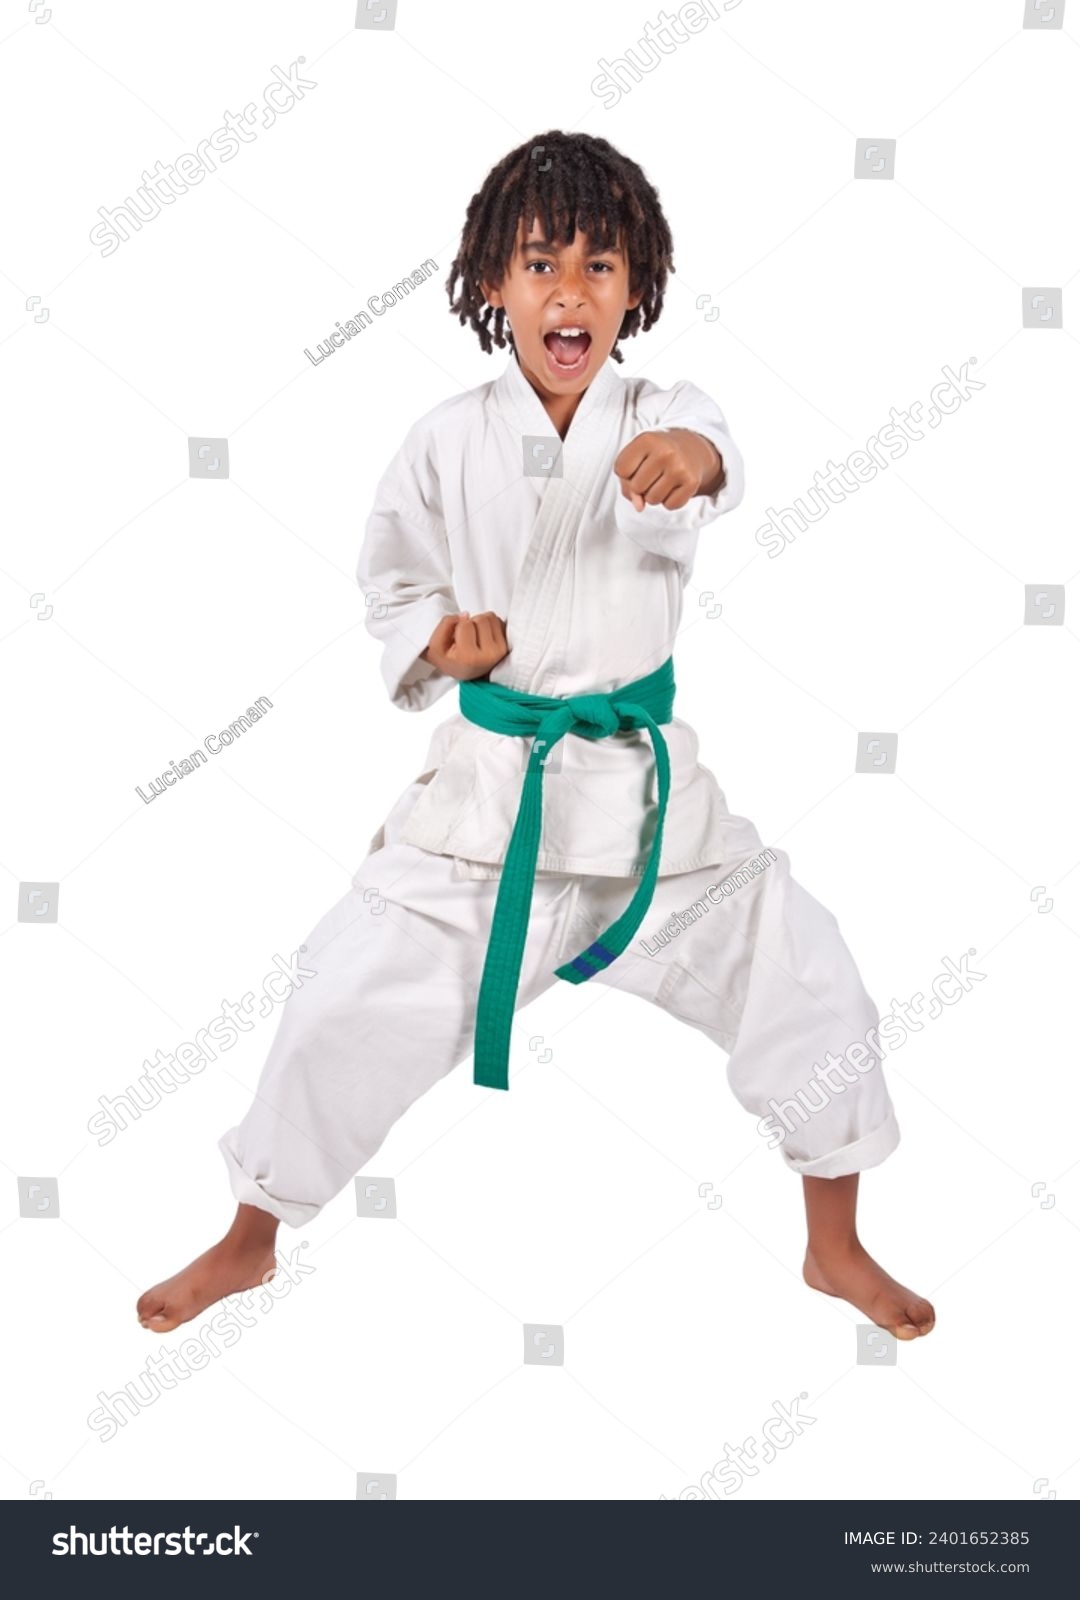 african american boy in karate suit training, mixed race , uniform karate gi , keikogi or dogi, suit is white, he is mixed race with braids, dreadlocks, isolated on white background #2401652385